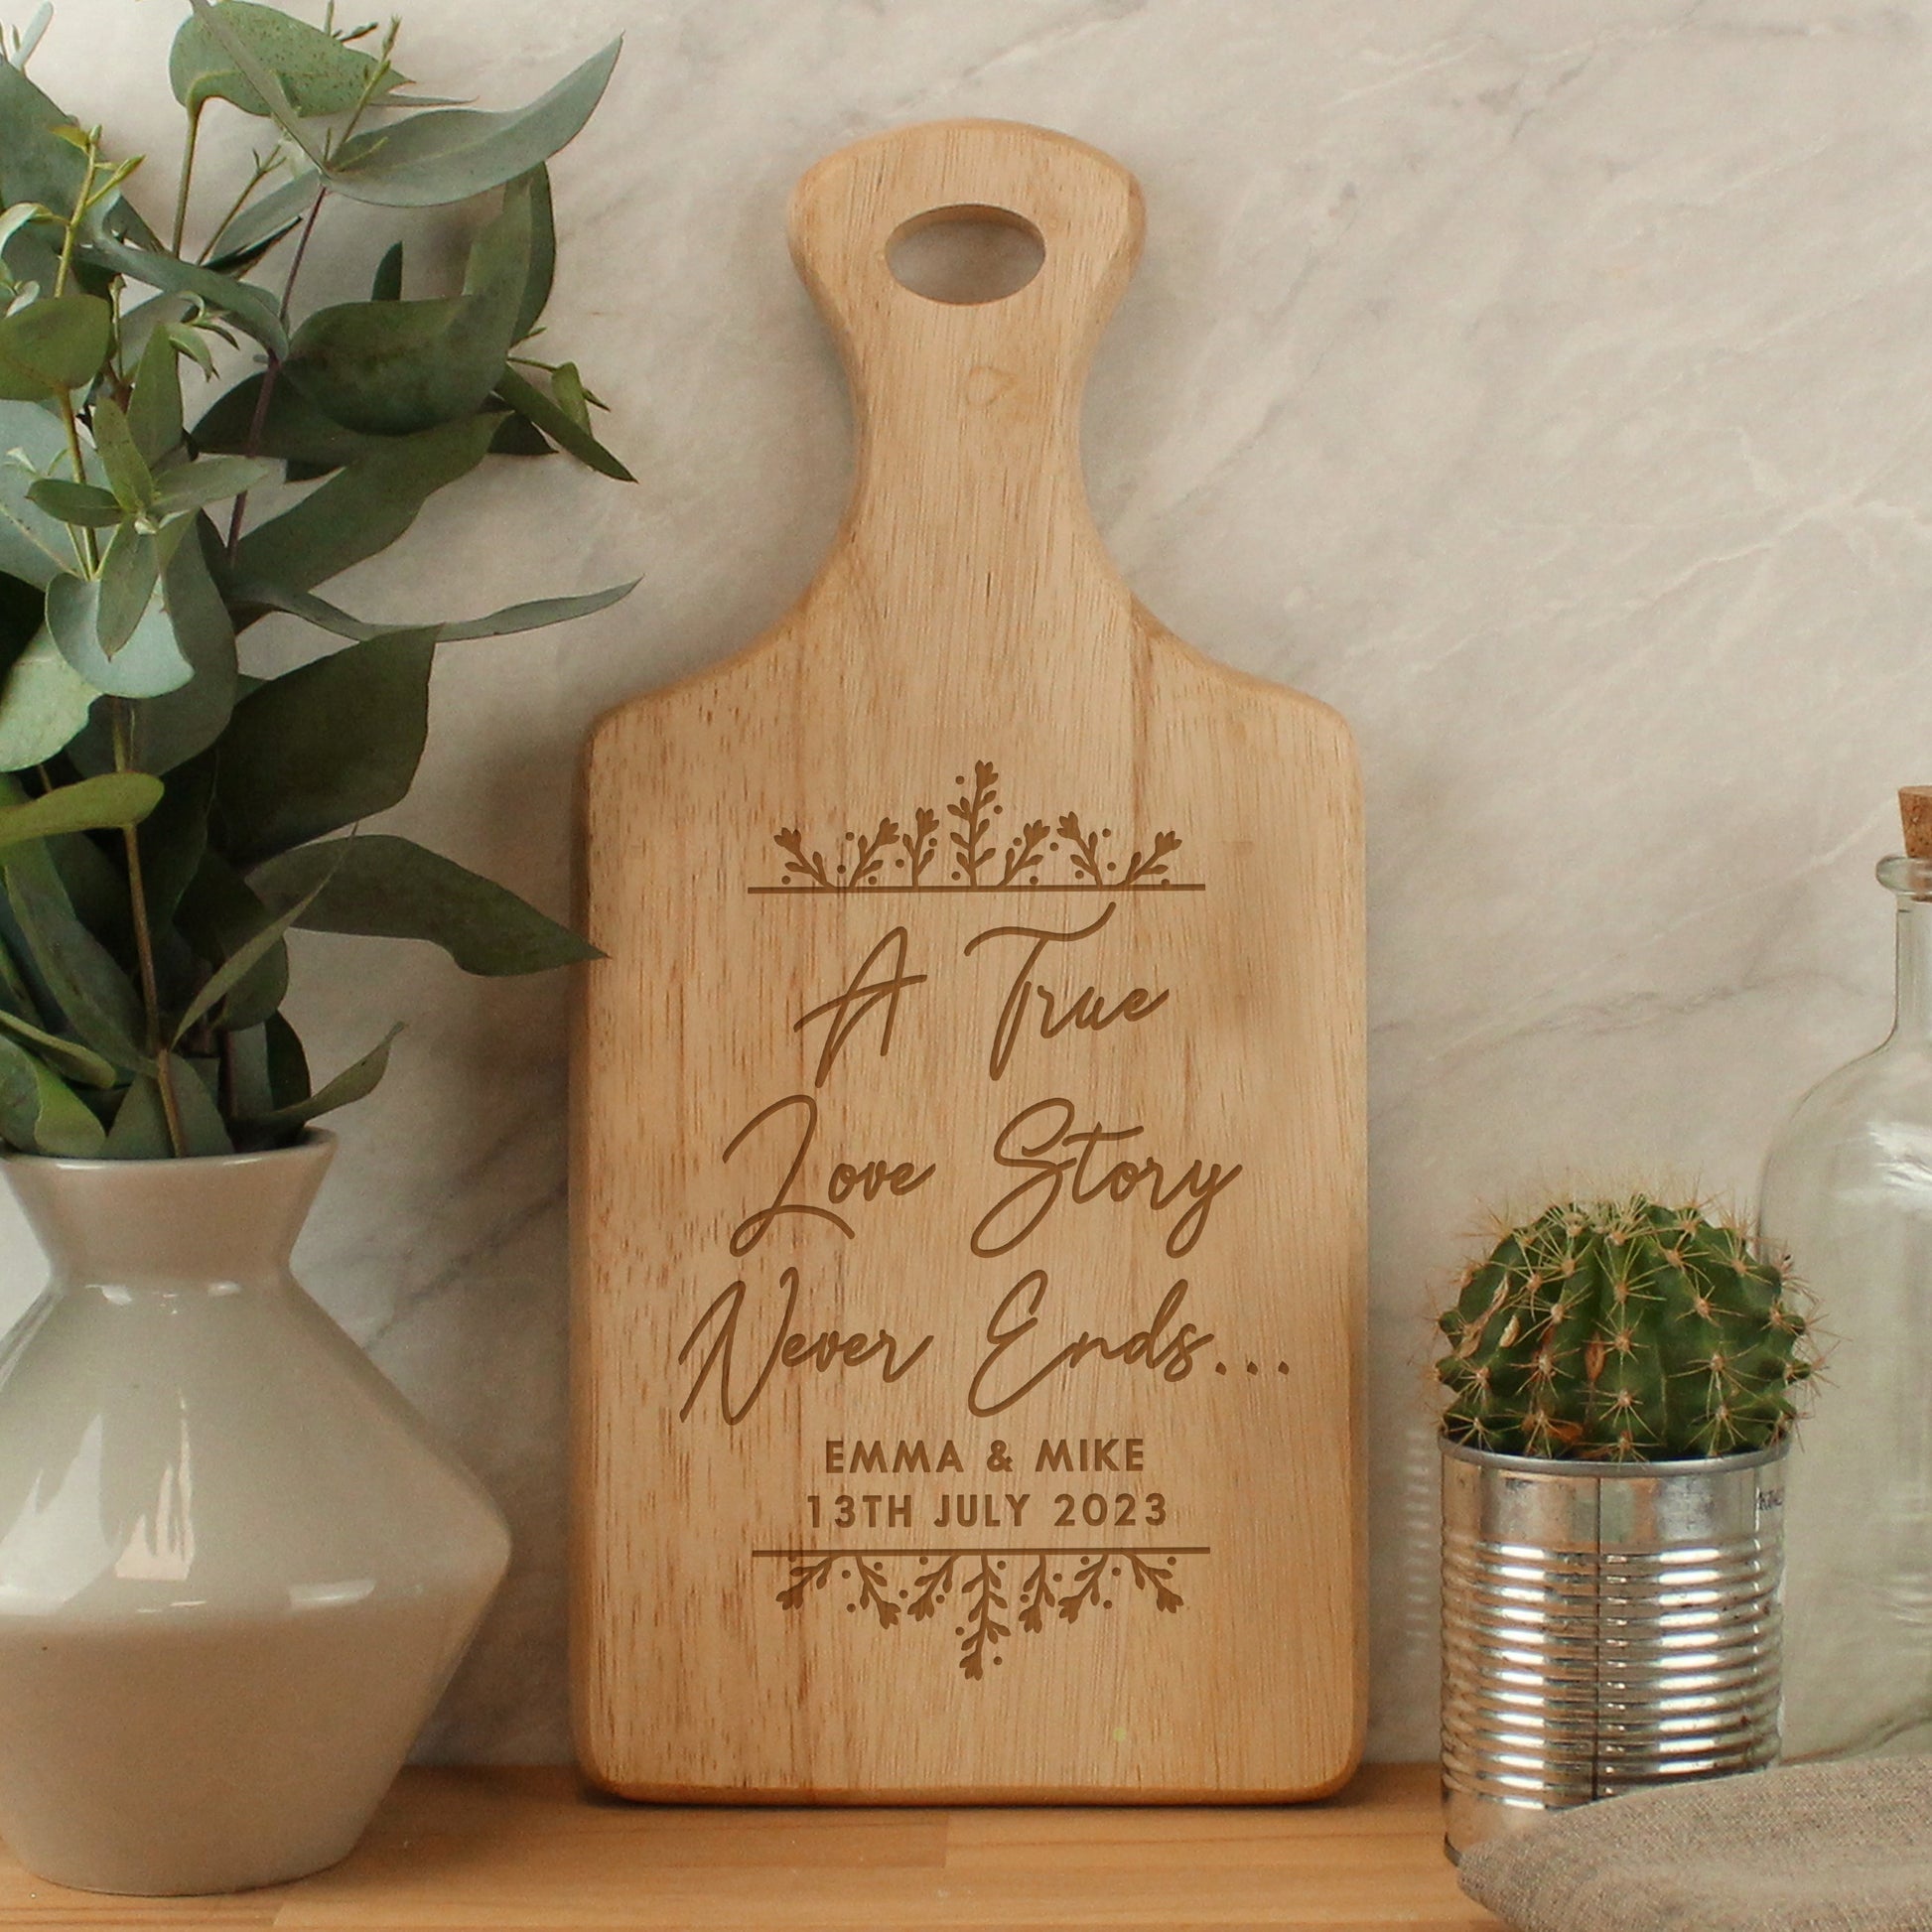 TRUE LOVE STORY PERSONALISED WOODEN PADDLE BOARD  from Eleanoras